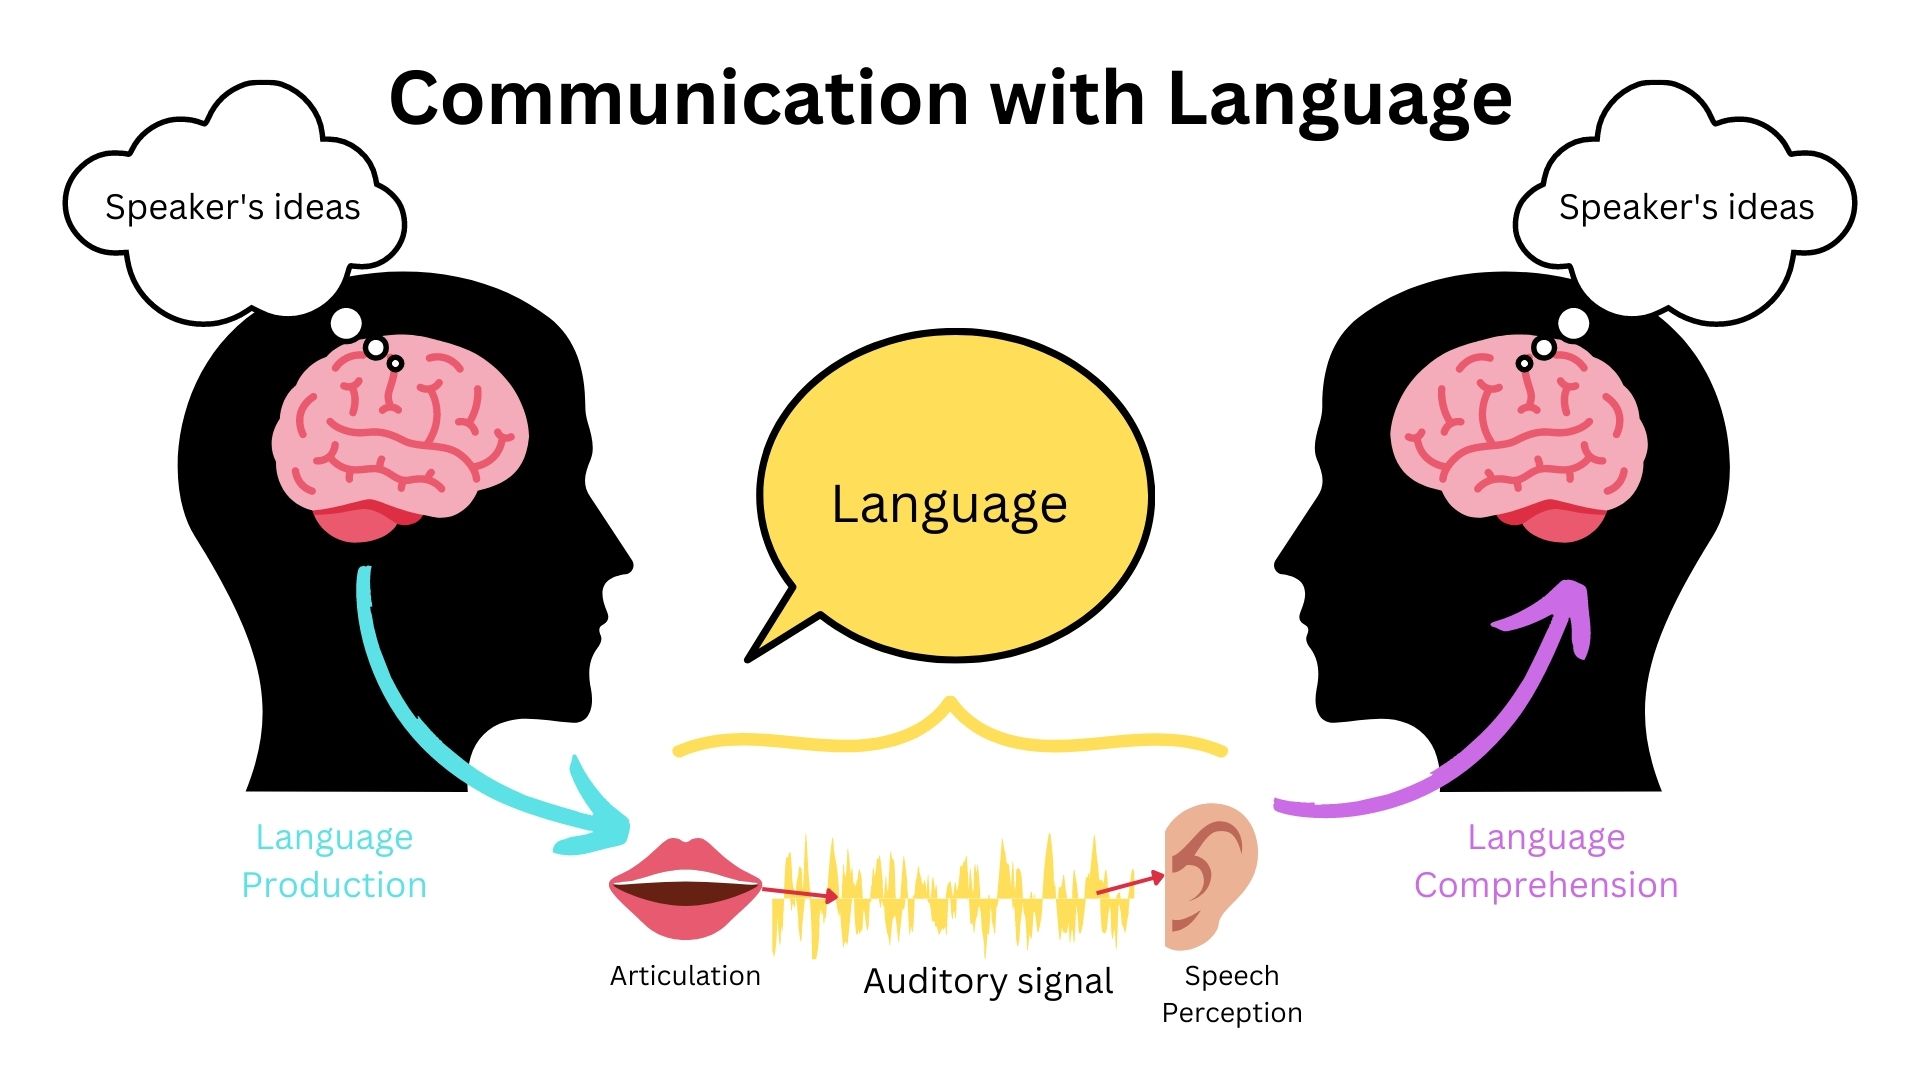 A model of communication with language exchange.